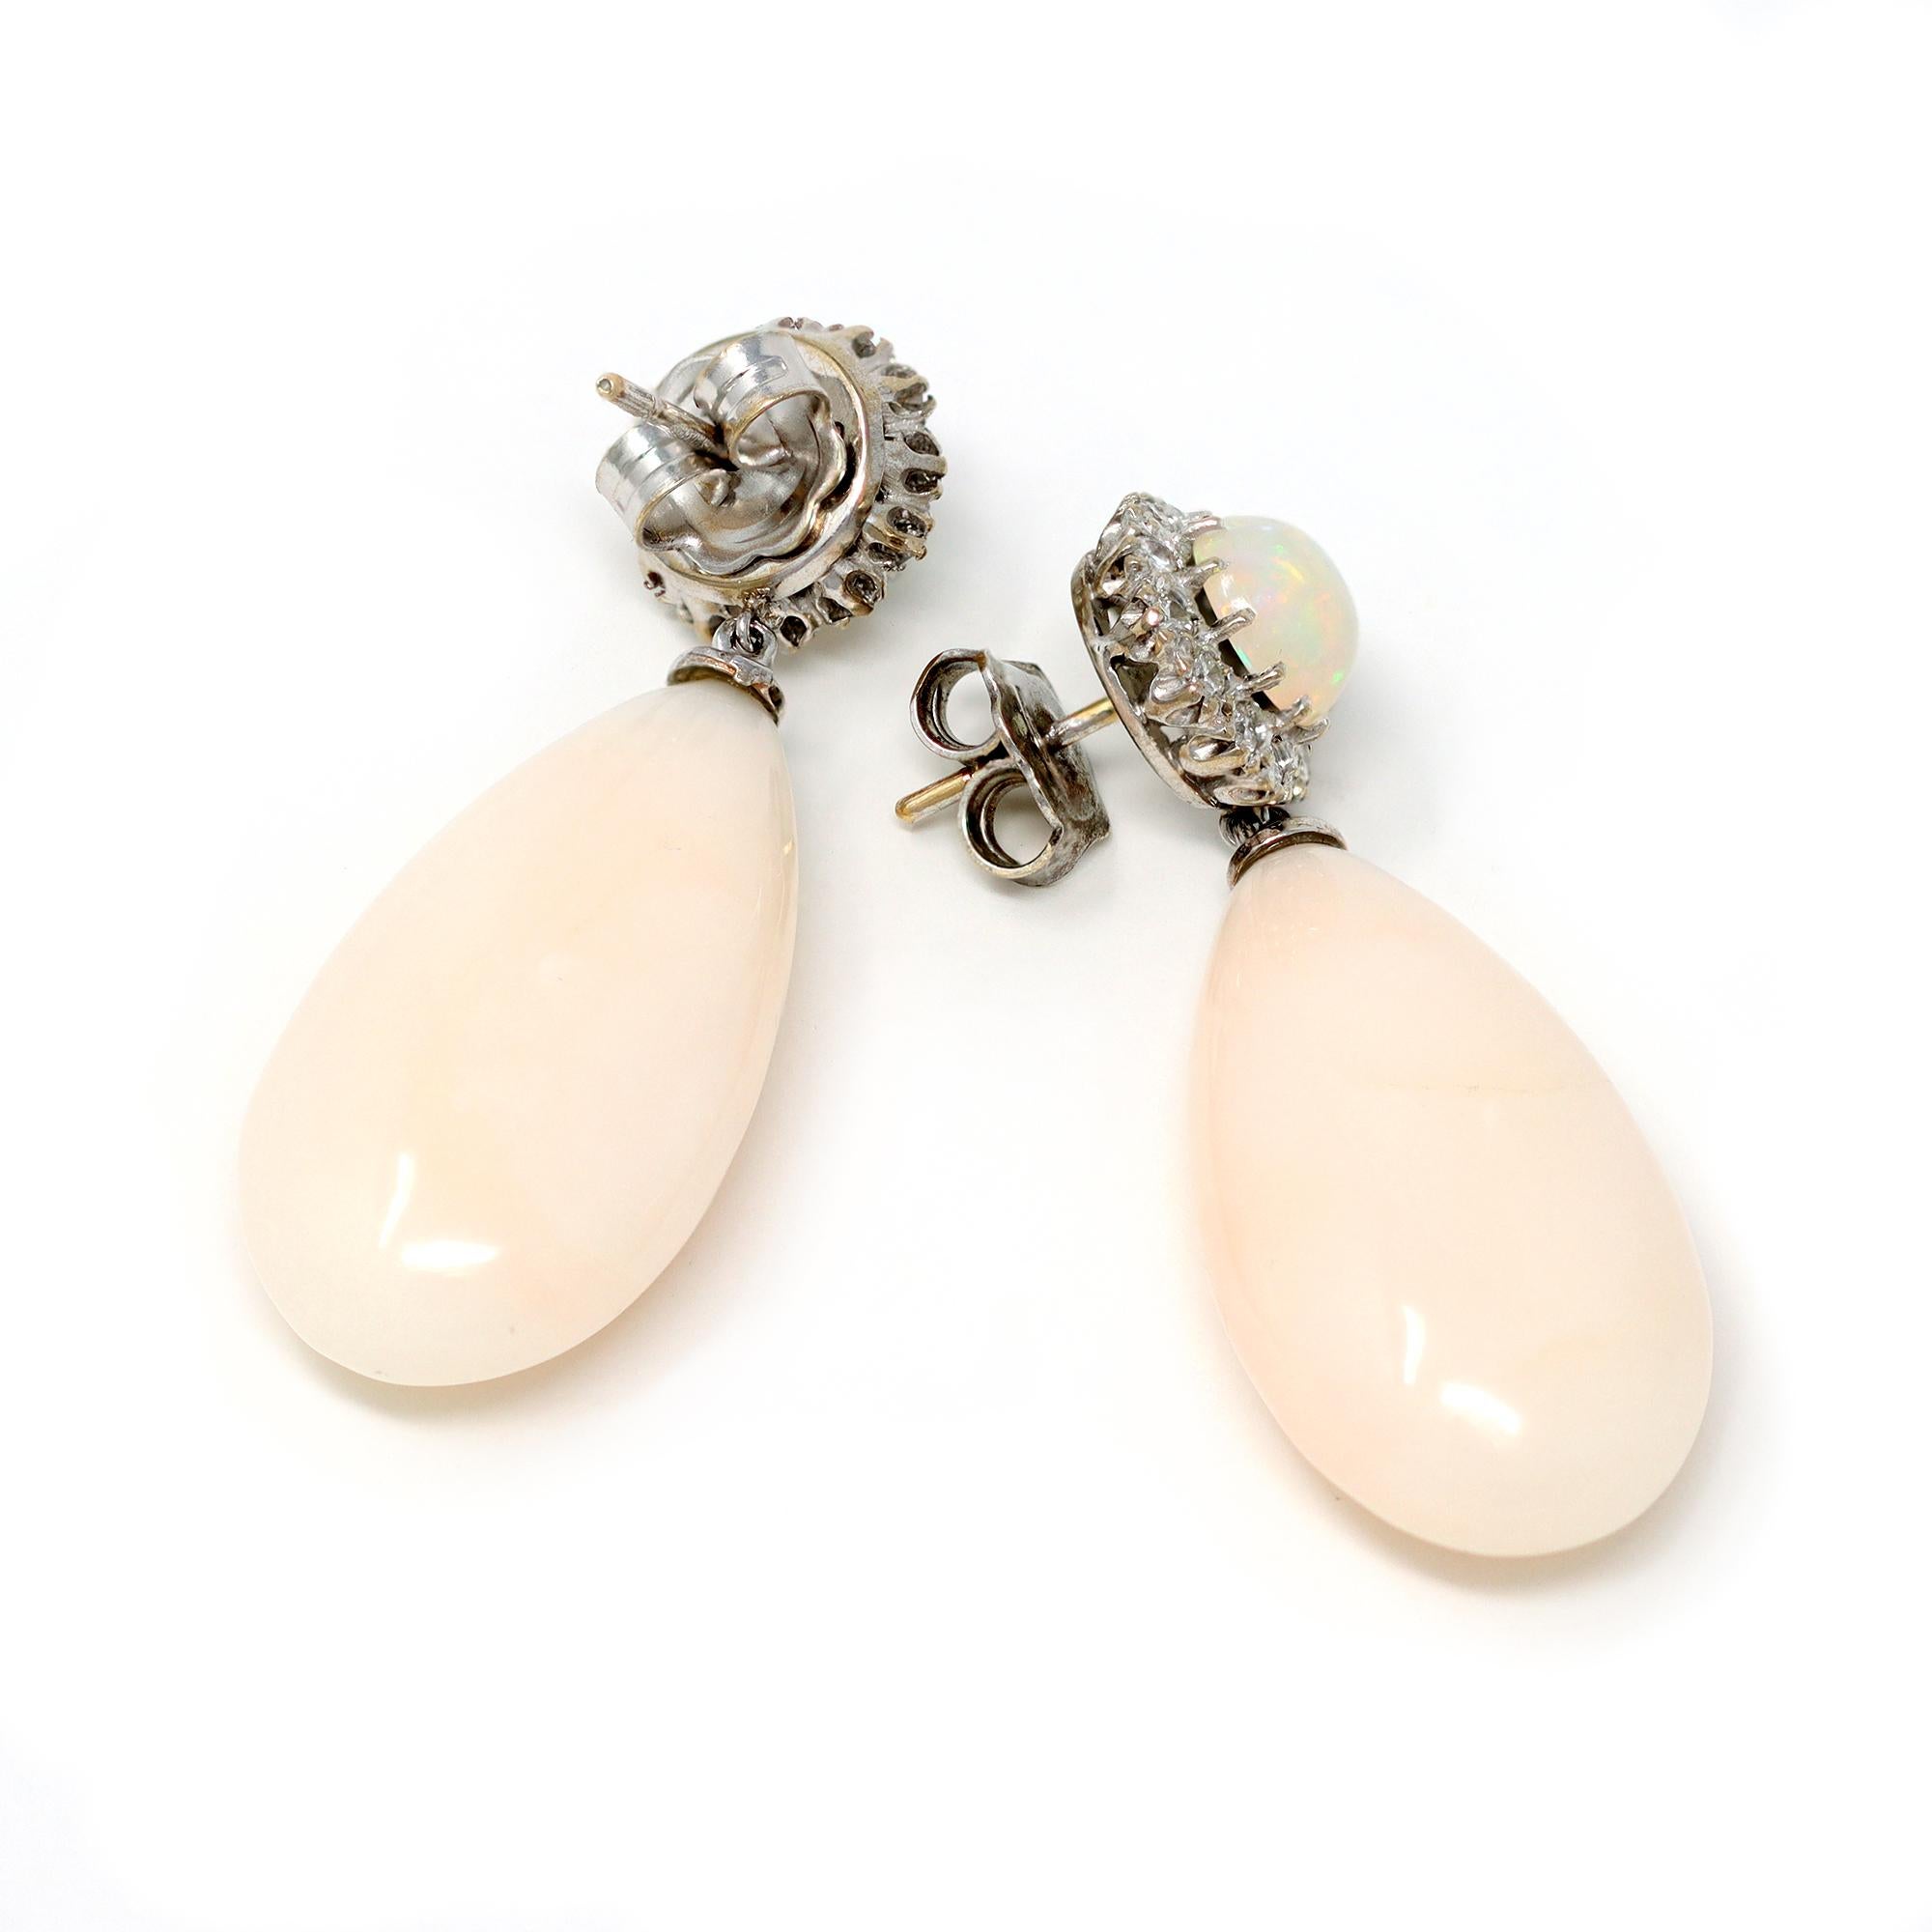 A one-of-a-kind dangling earrings featuring light pink coral drops dangling from a round opal stud surrounded by a halo of diamonds. The earrings are set in 18-karat white gold; they are vintage, circa 1960-70. The hallmarks read S&R. The diamond's